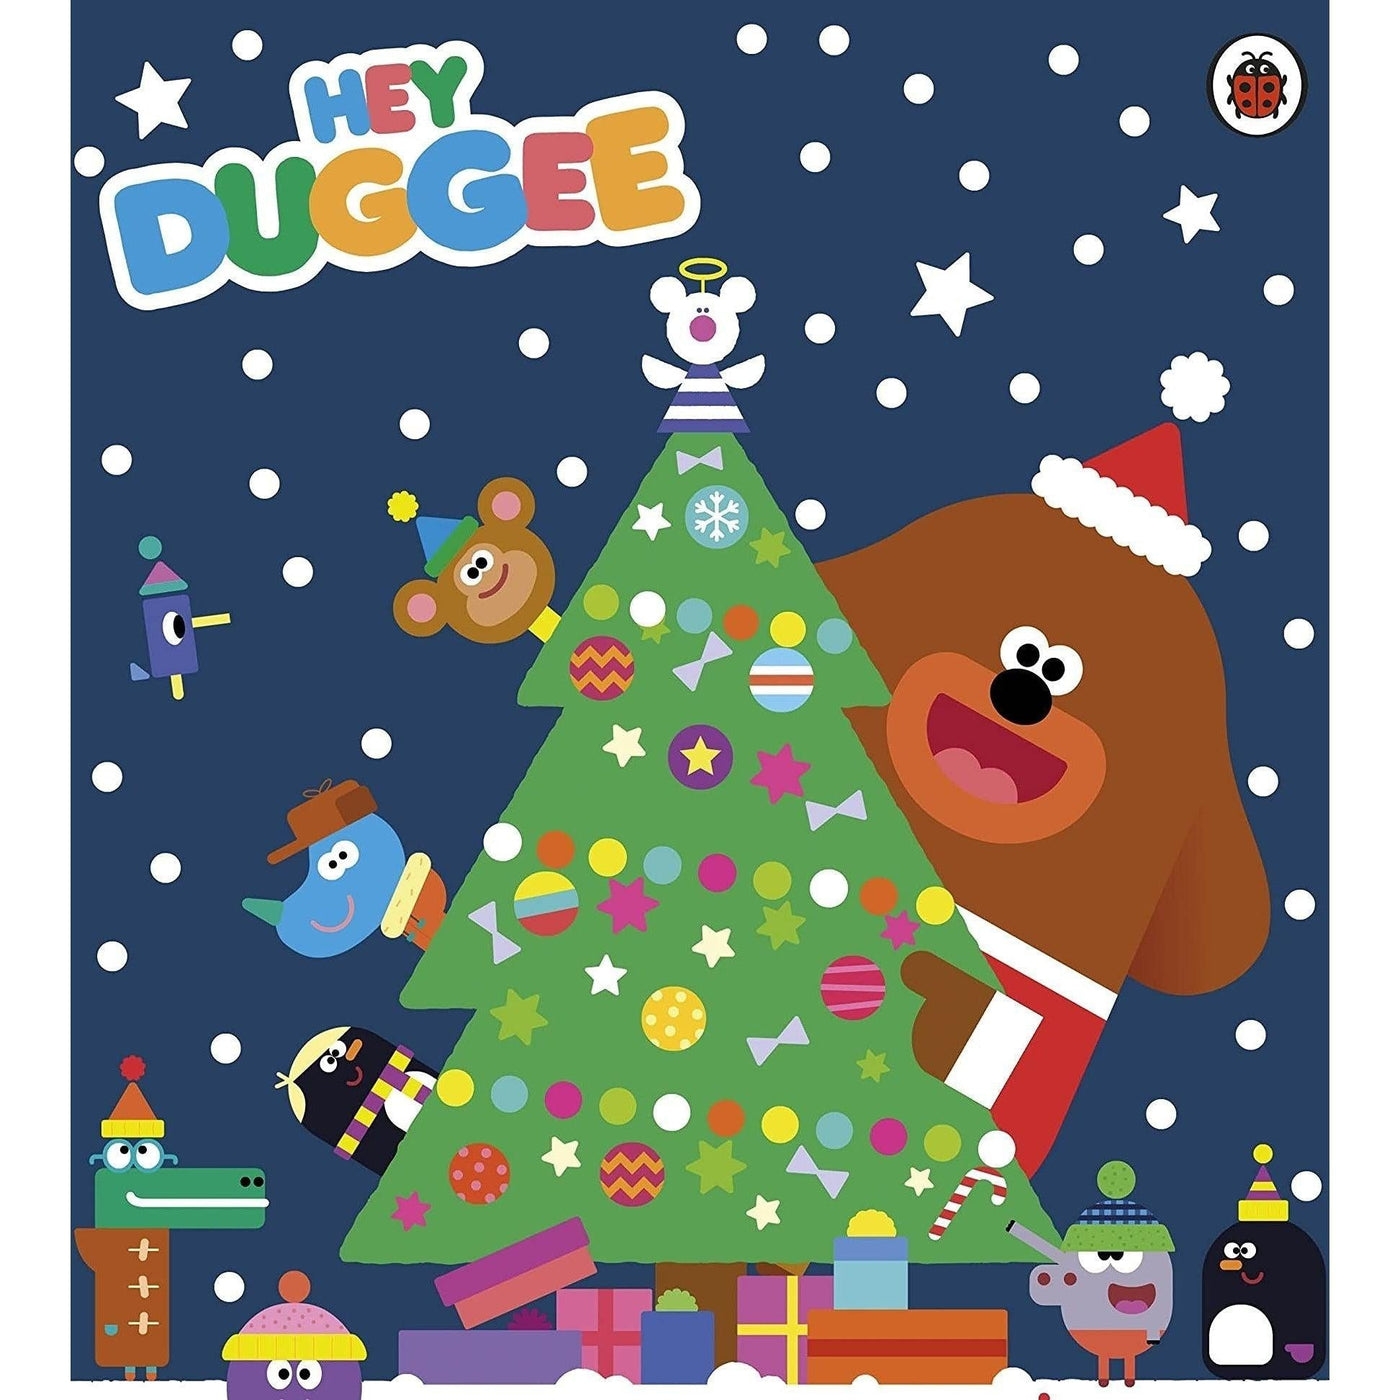 Hey Duggee: Happy Christmas! Sticker Colouring Book